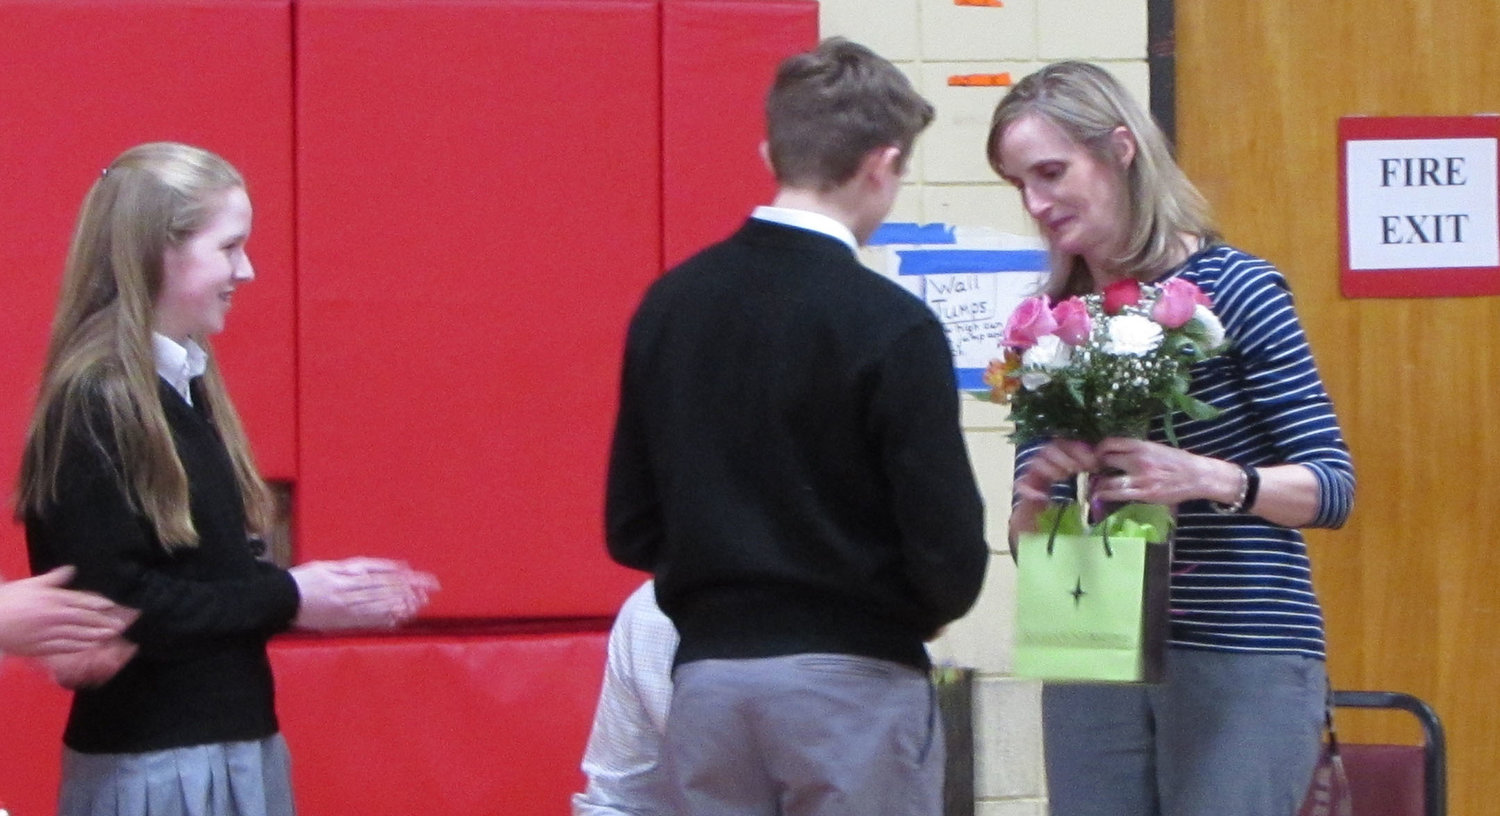 Eighth graders Anna Vredenburg and Ryan Stone present Principal Senenko with gifts and flowers from the school.